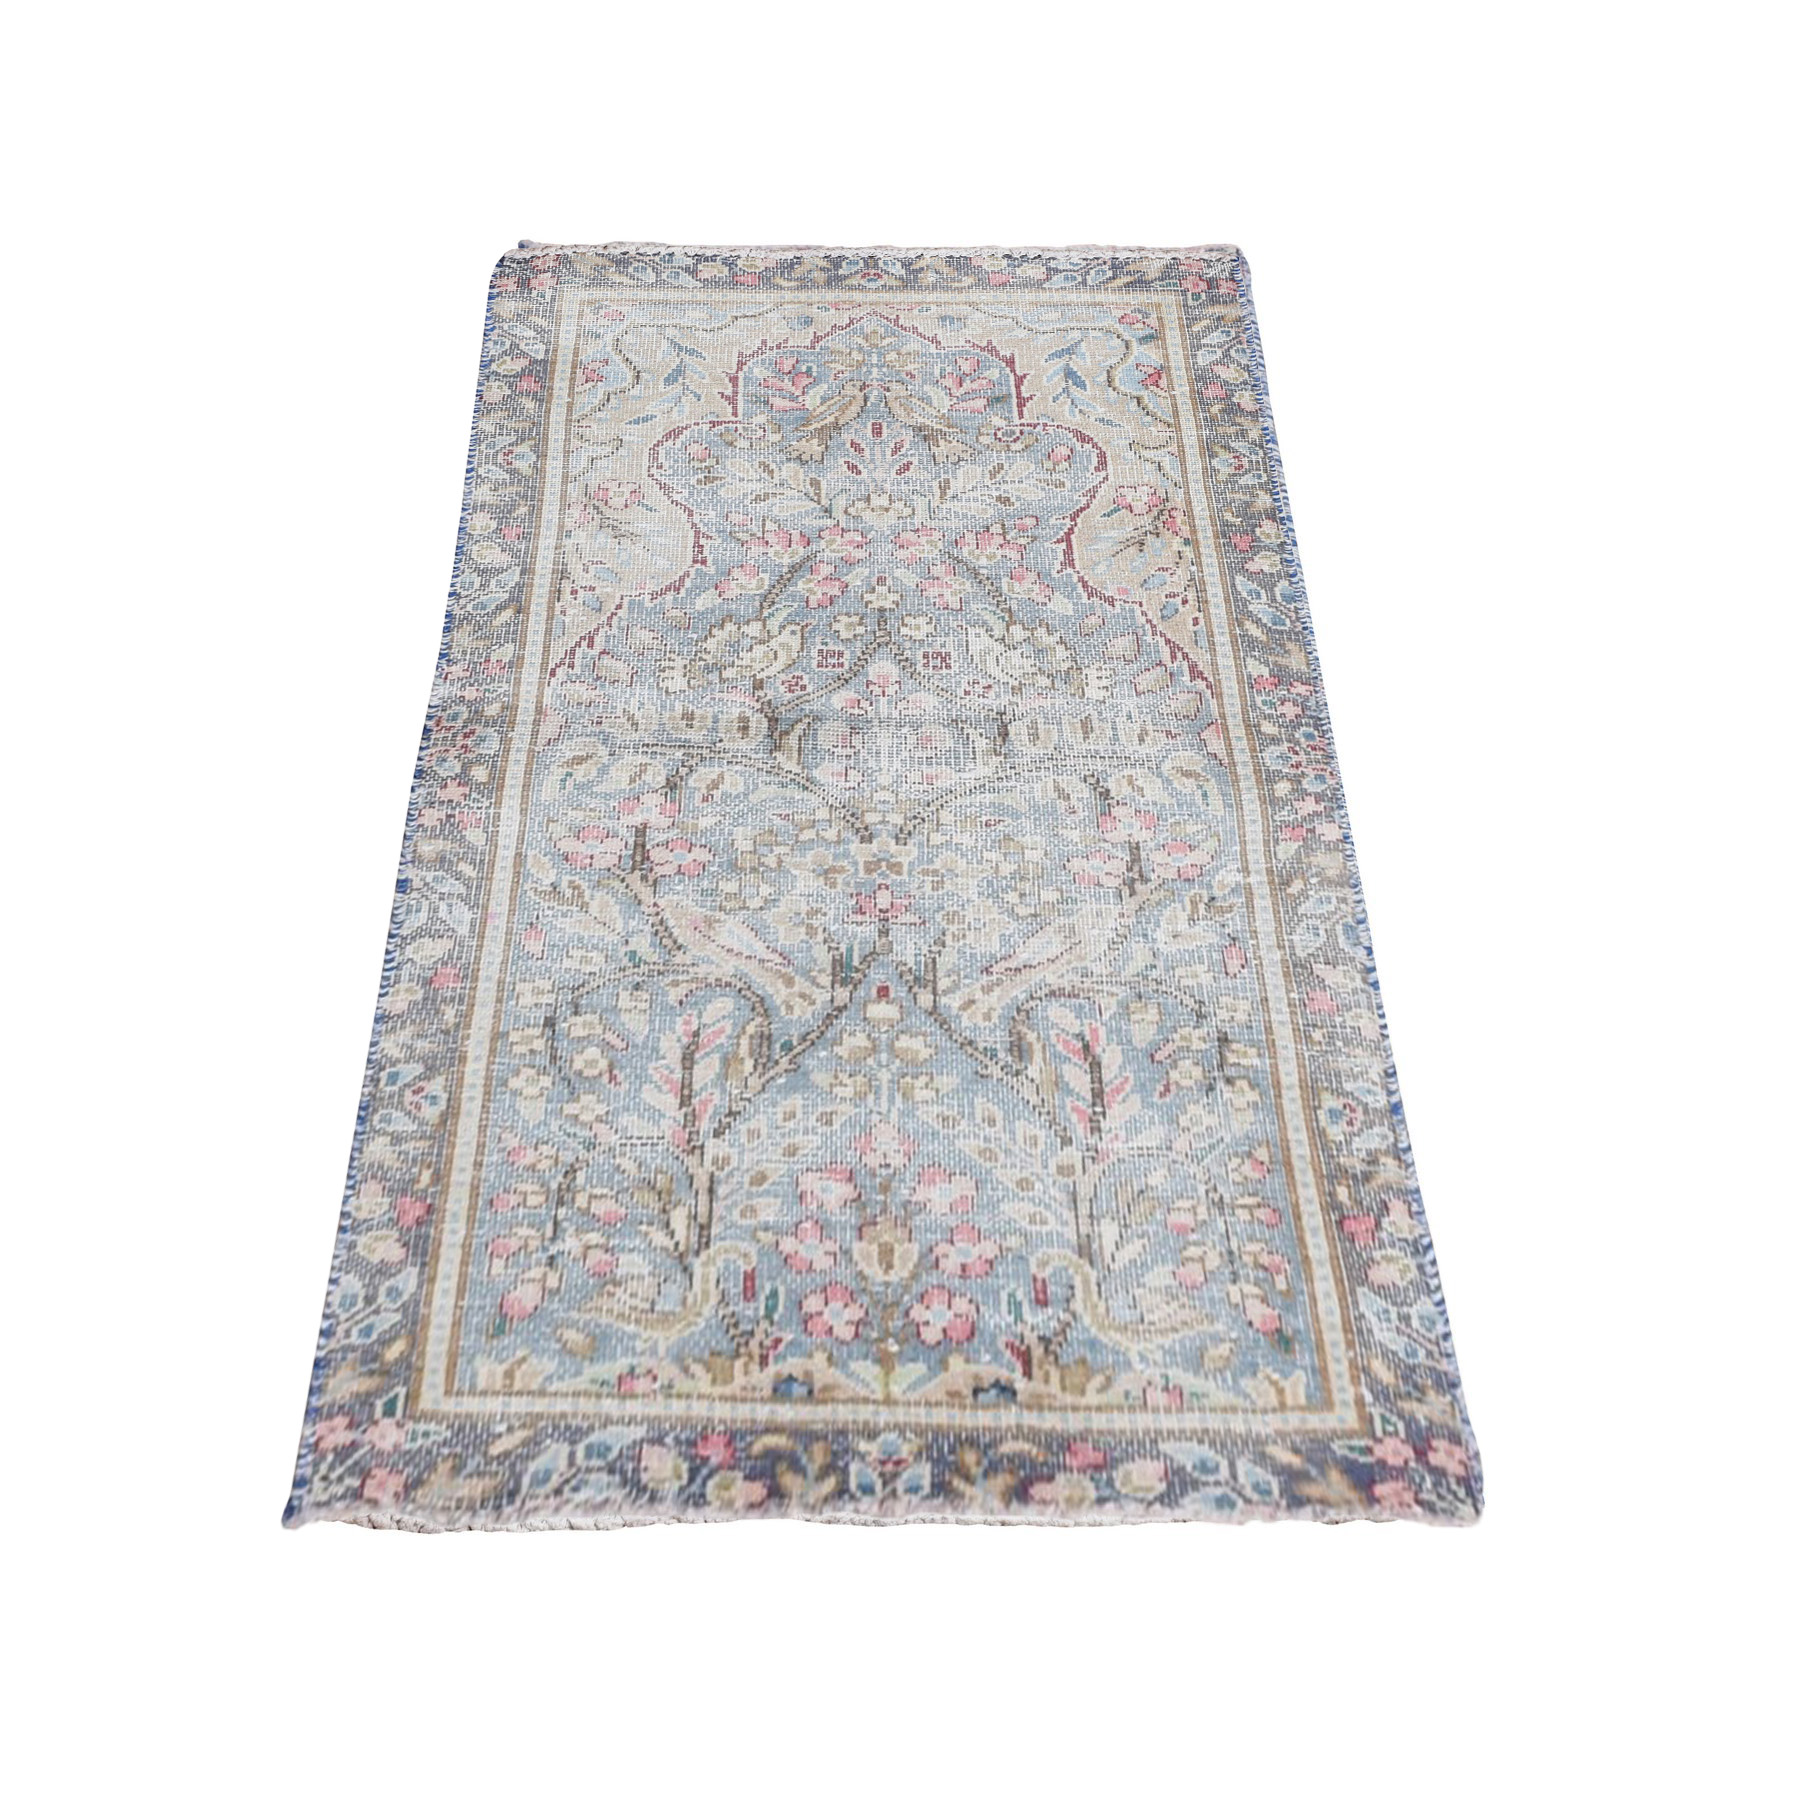  Wool Hand-Knotted Area Rug 1'9